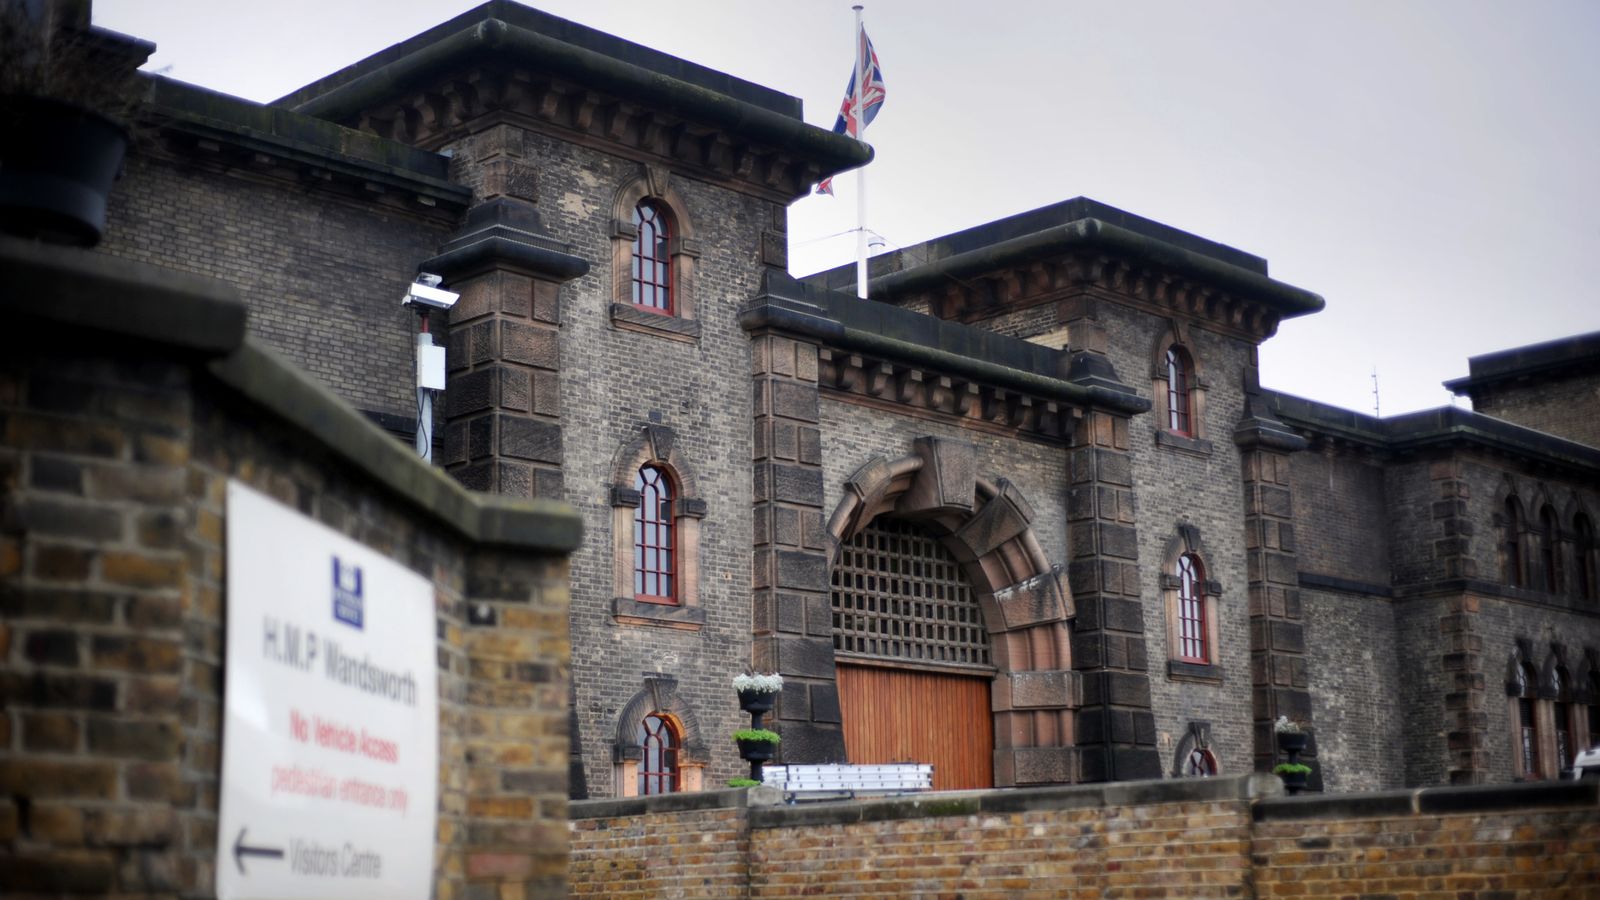 Daniel Abed Khalife: Wandsworth prison - where fugitive escaped from - 'really needs closing', says chief inspector